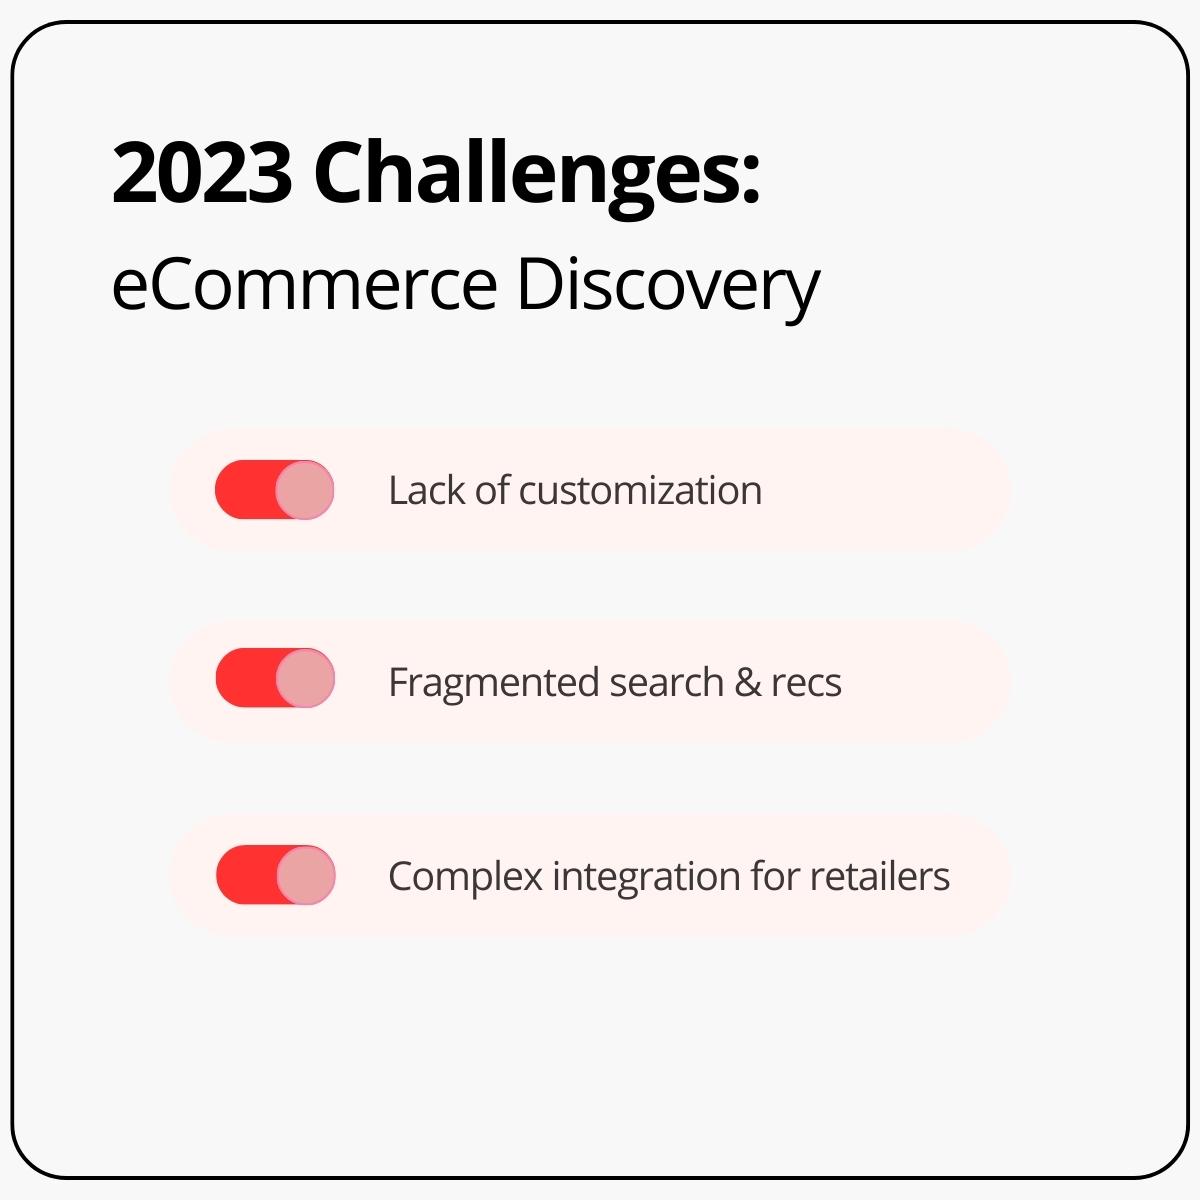 2023 Challenges for eCommerce discovery